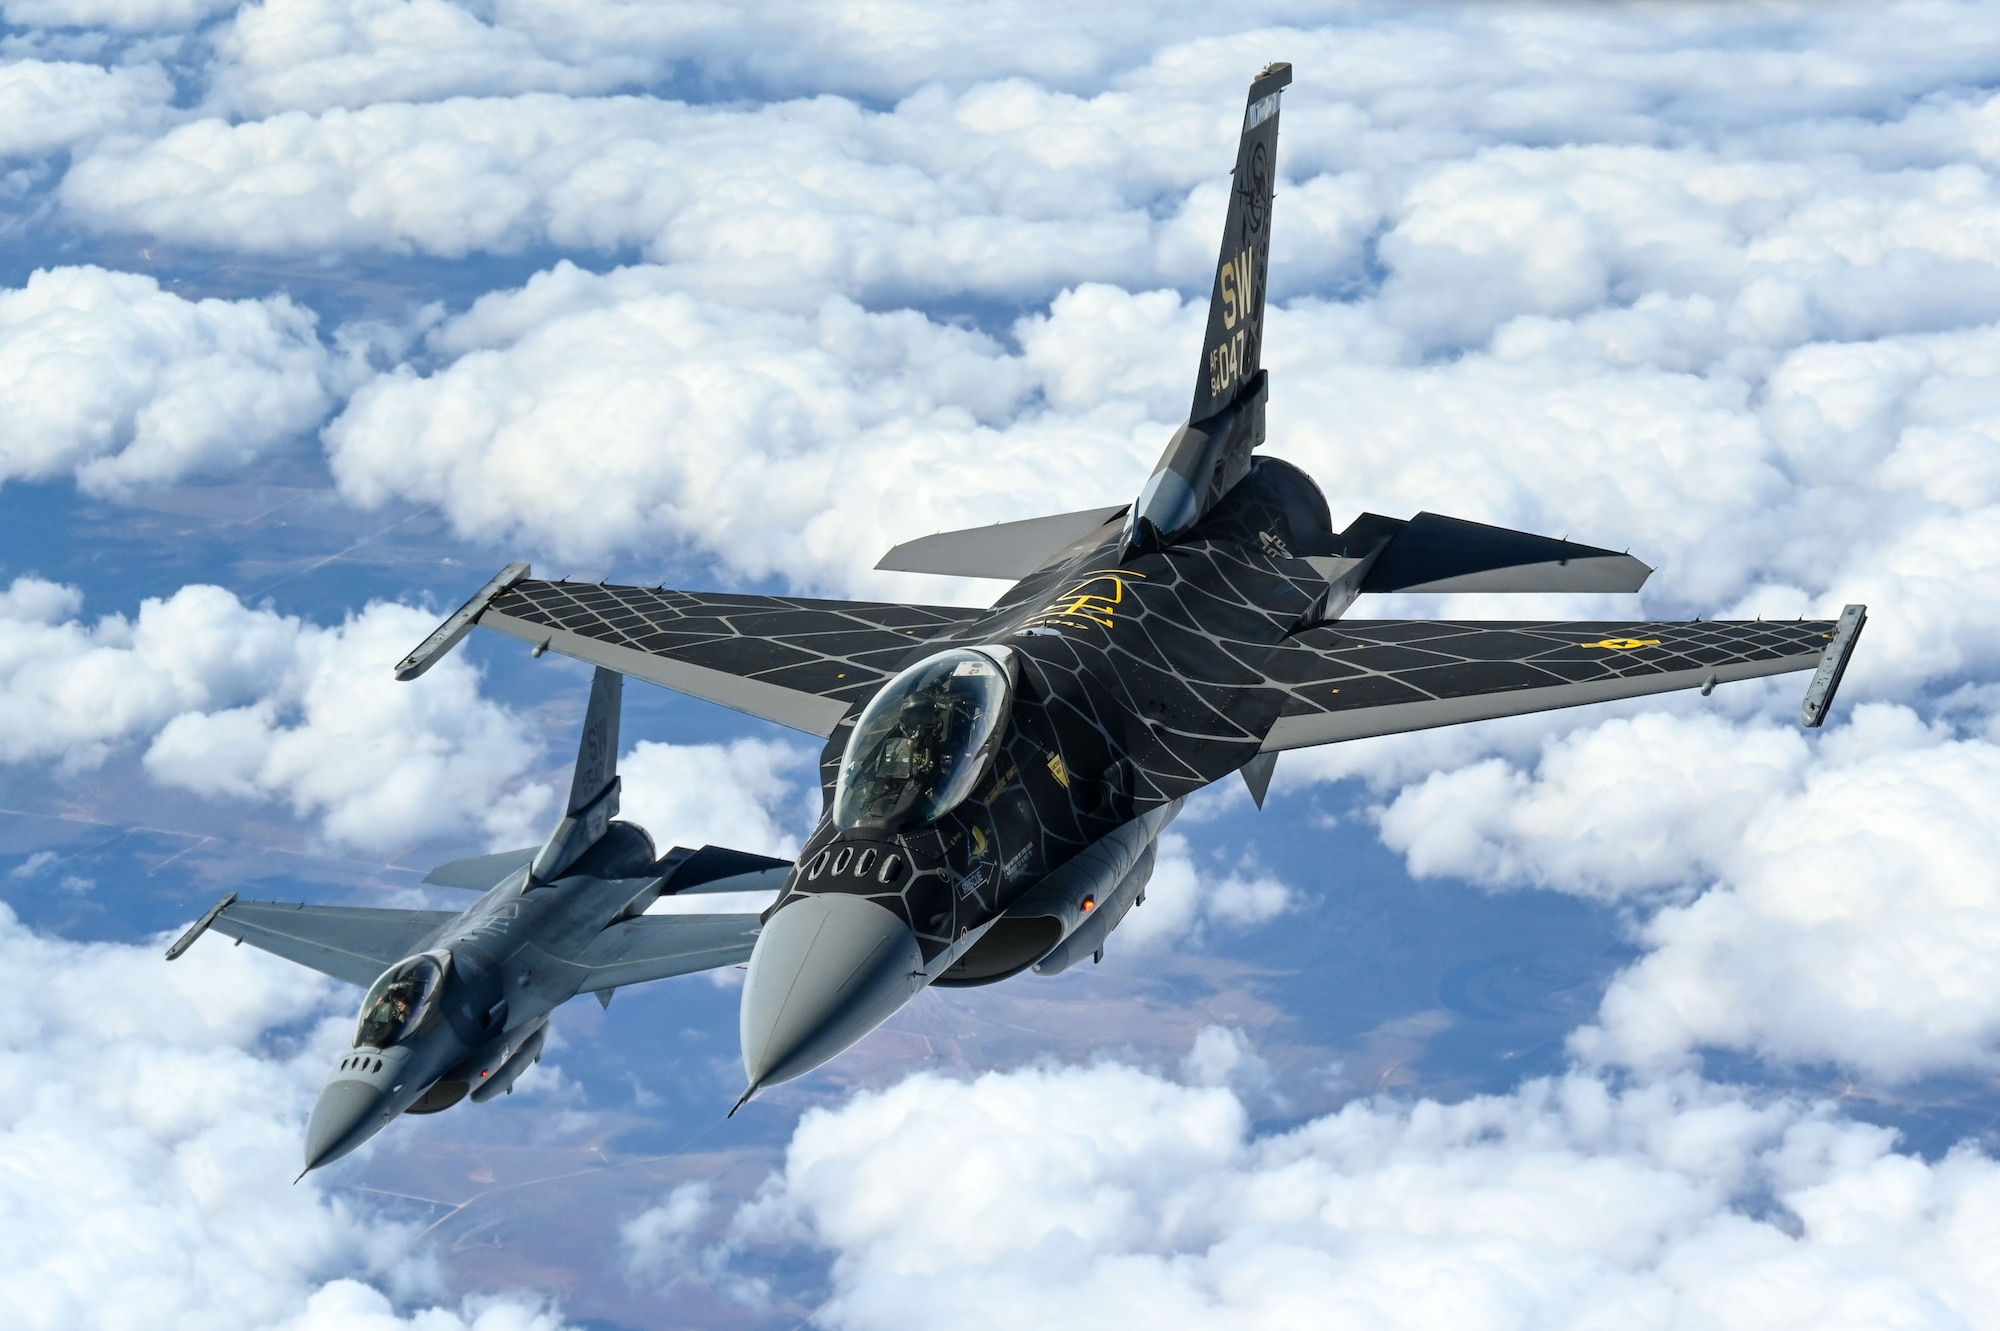 F-16 Viper Demonstration Team pilots fly behind a KC-135 Stratotanker from the 465th Air Refueling Squadron at Tinker Air Force Base, Oklahoma, March 8, 2021. The F-16 team from Shaw Air Force Base, South Carolina, is assigned to Air Combat Command and received fuel from the Okies during their flight back to  their home station after performing at an air show. (U.S. Air Force photo by Senior Airman Mary Begy)